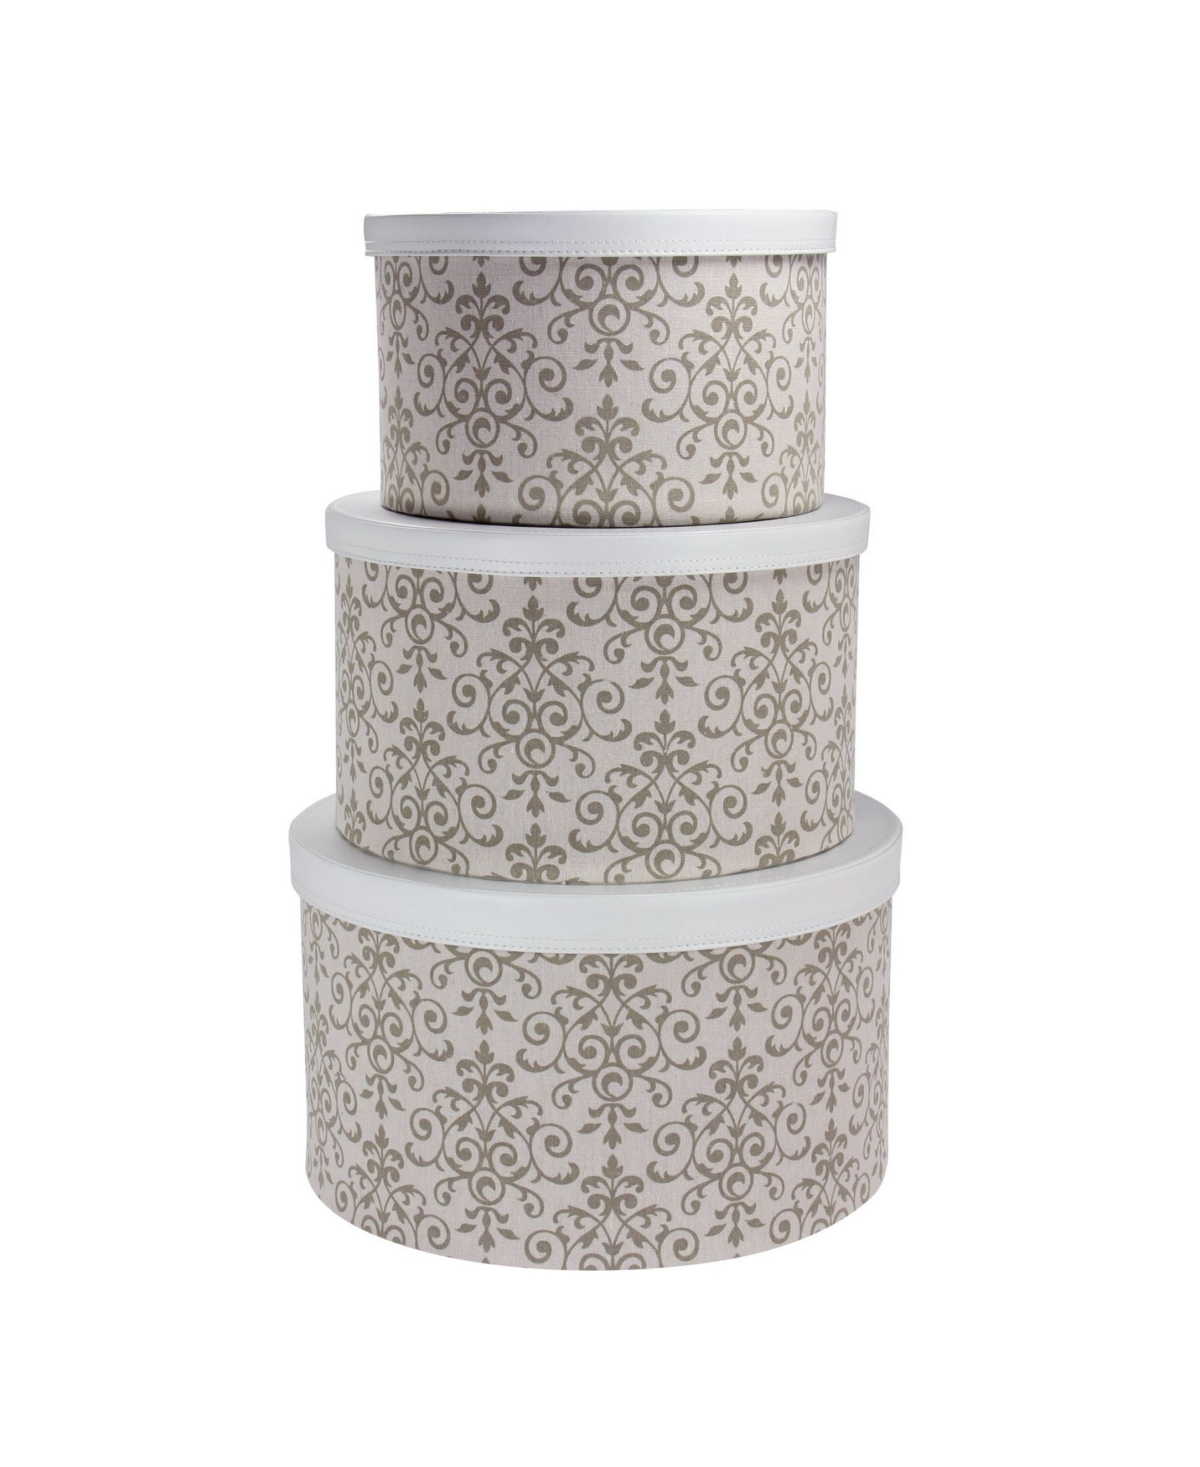 HOUSEHOLD ESSENTIALS ROUND HAT BOXES WITH LIDS, SET OF 3